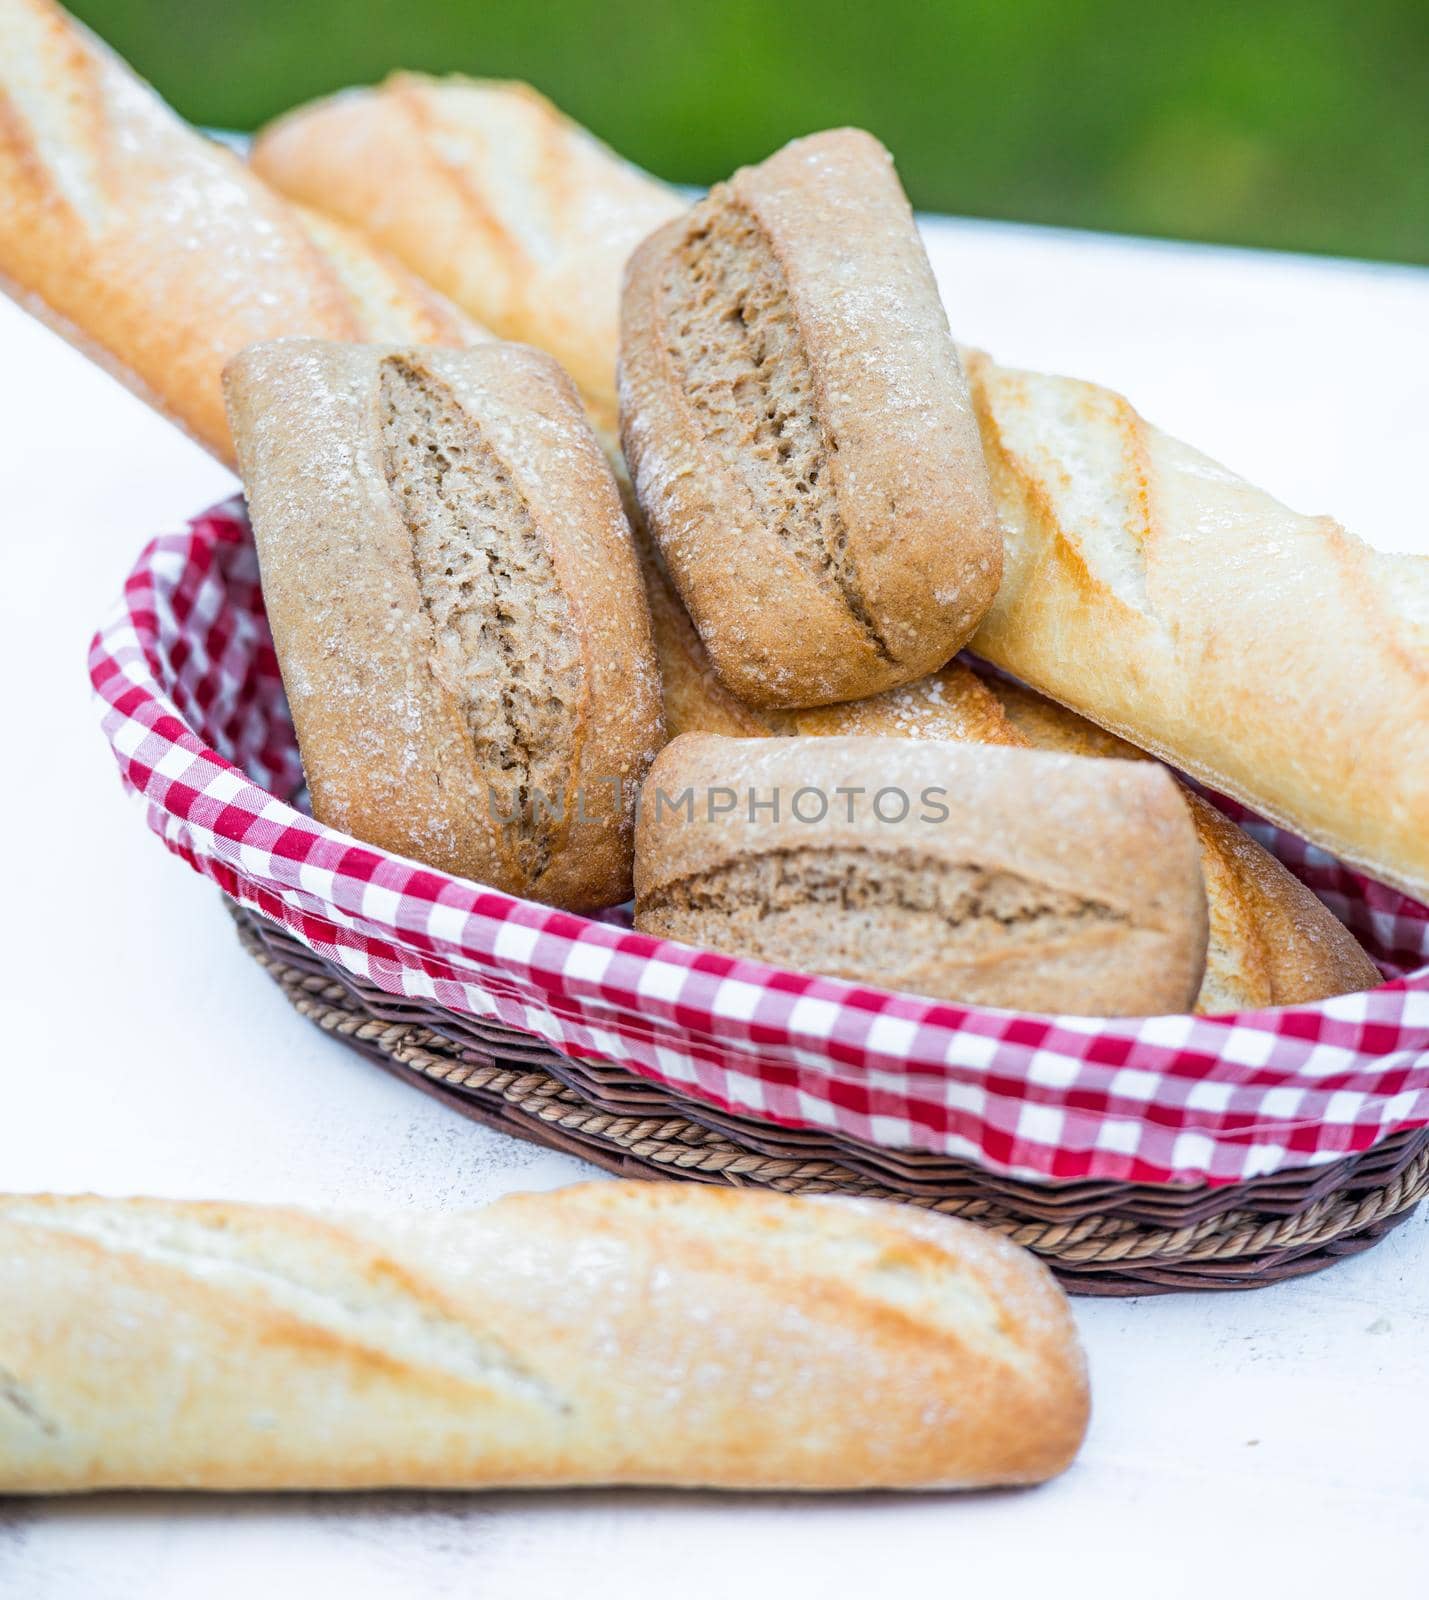 fresh baguette and bread on the table